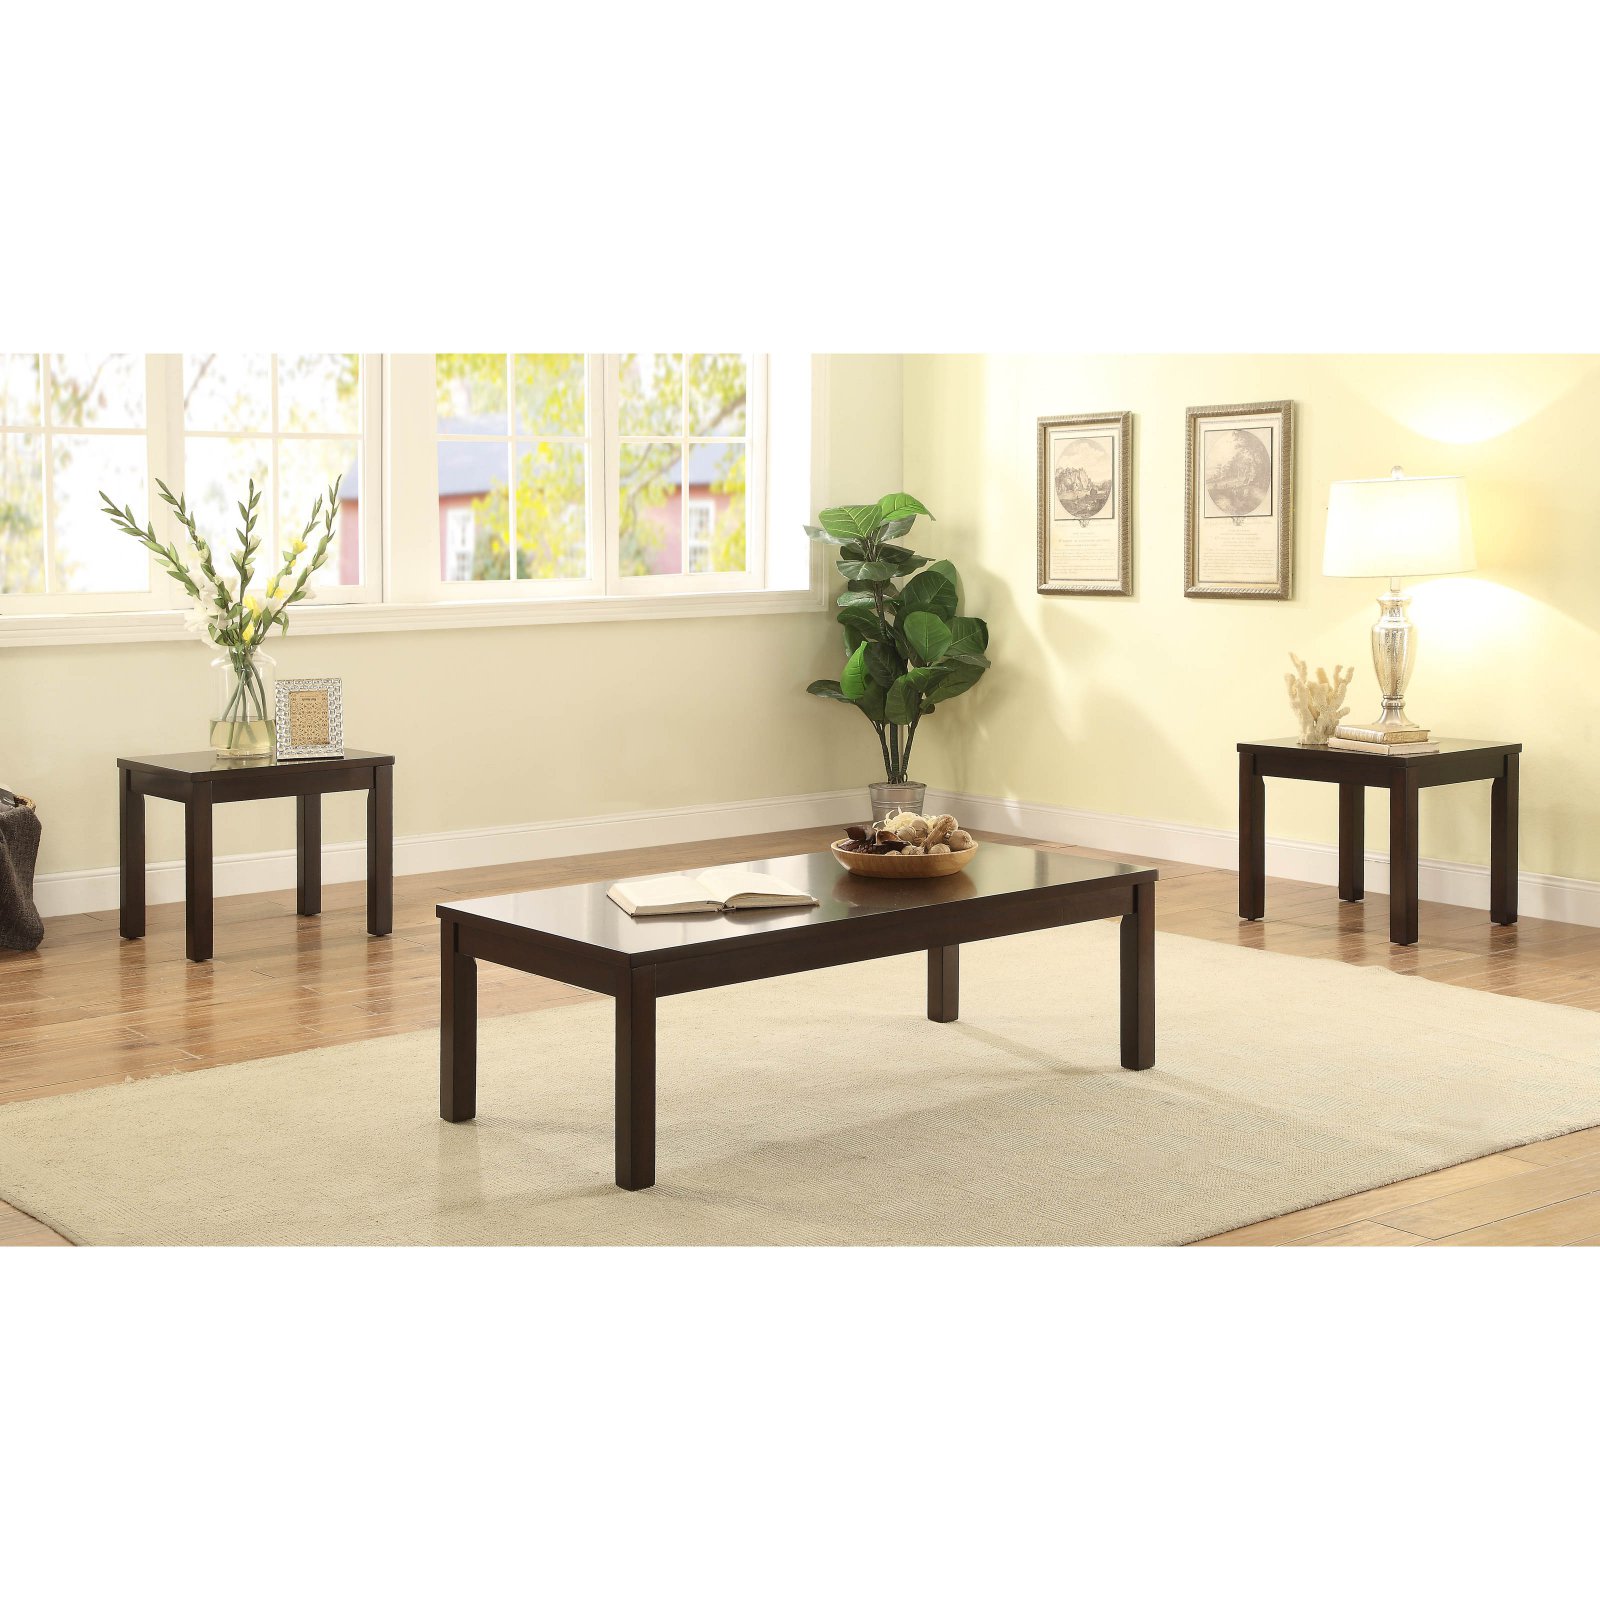 ACME Malak 3Pc Pack Coffee/End Table Set, Walnut-Finish:Walnut,Style:Contemporary/Casual - image 1 of 4